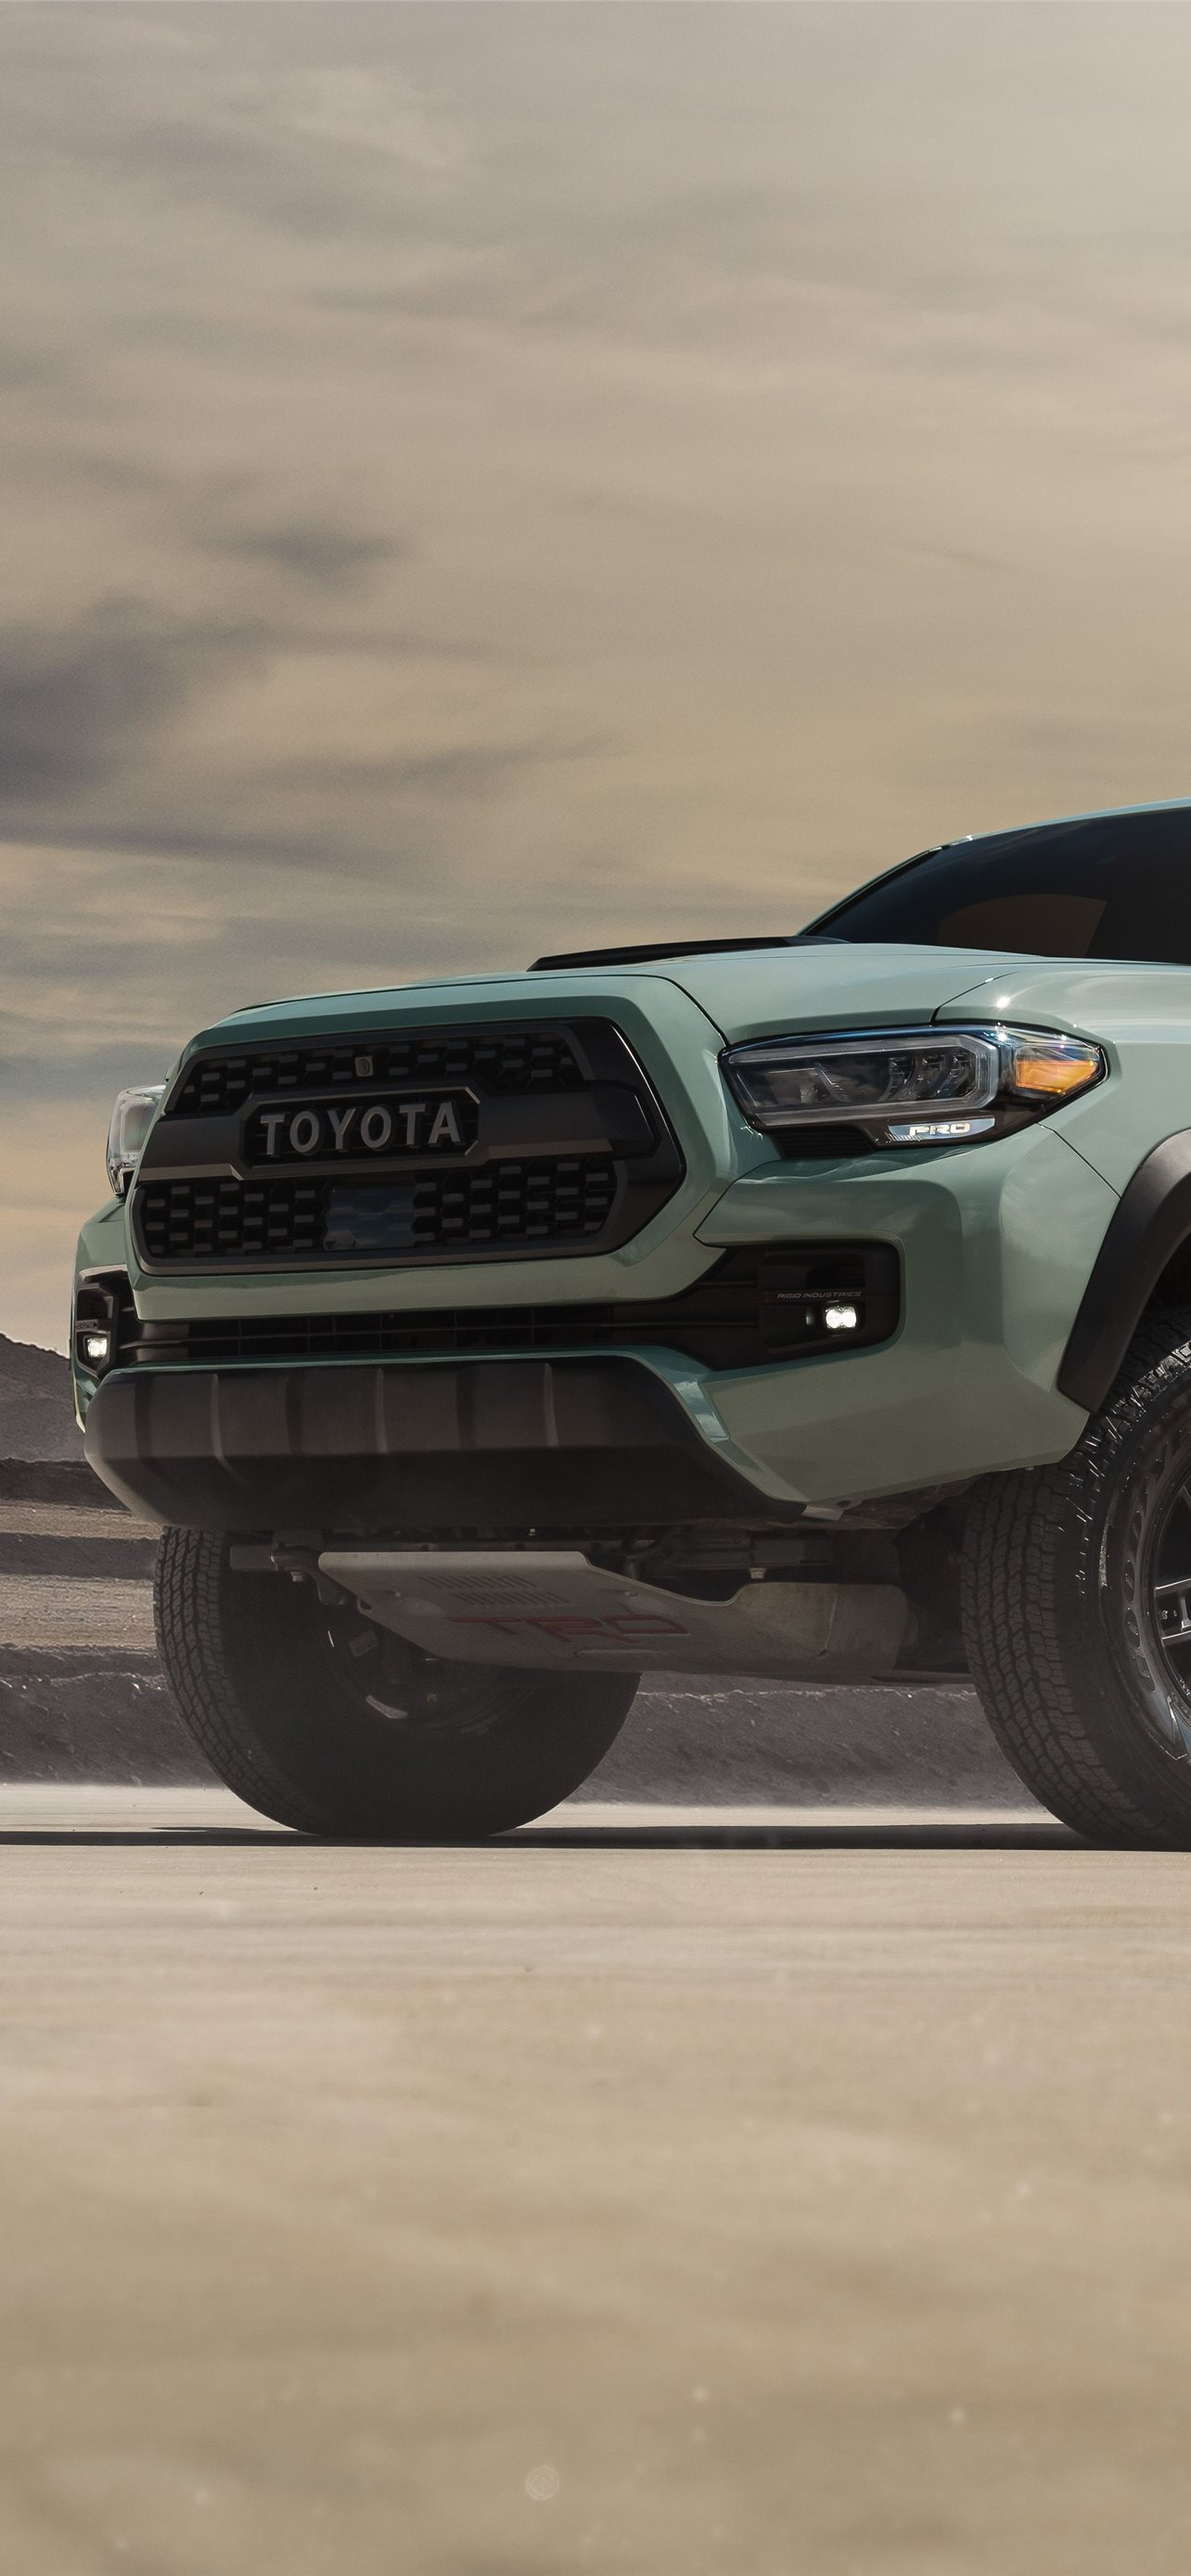 1284x2778 Best Toyota tacoma iPhone HD Wallpapers